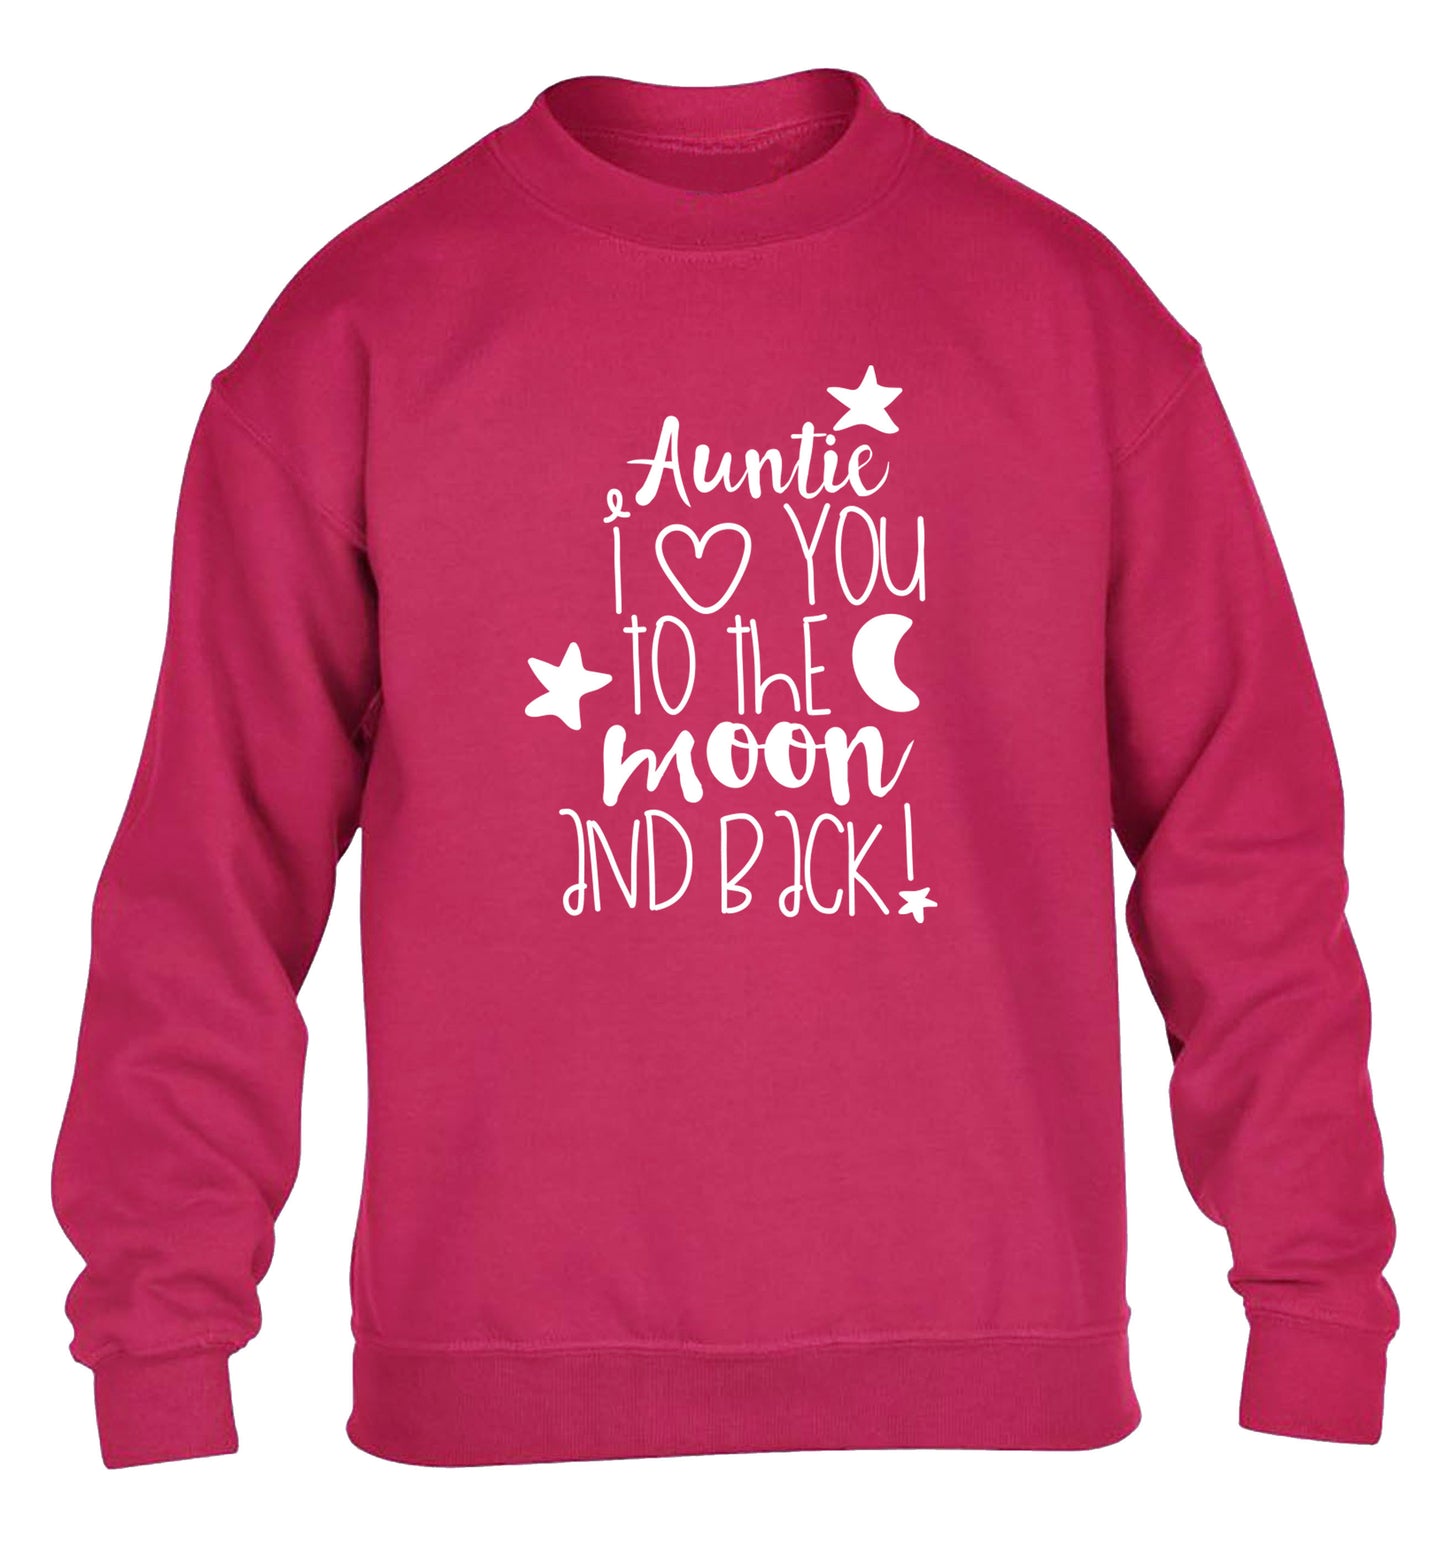 Auntie I love you to the moon and back children's pink  sweater 12-14 Years